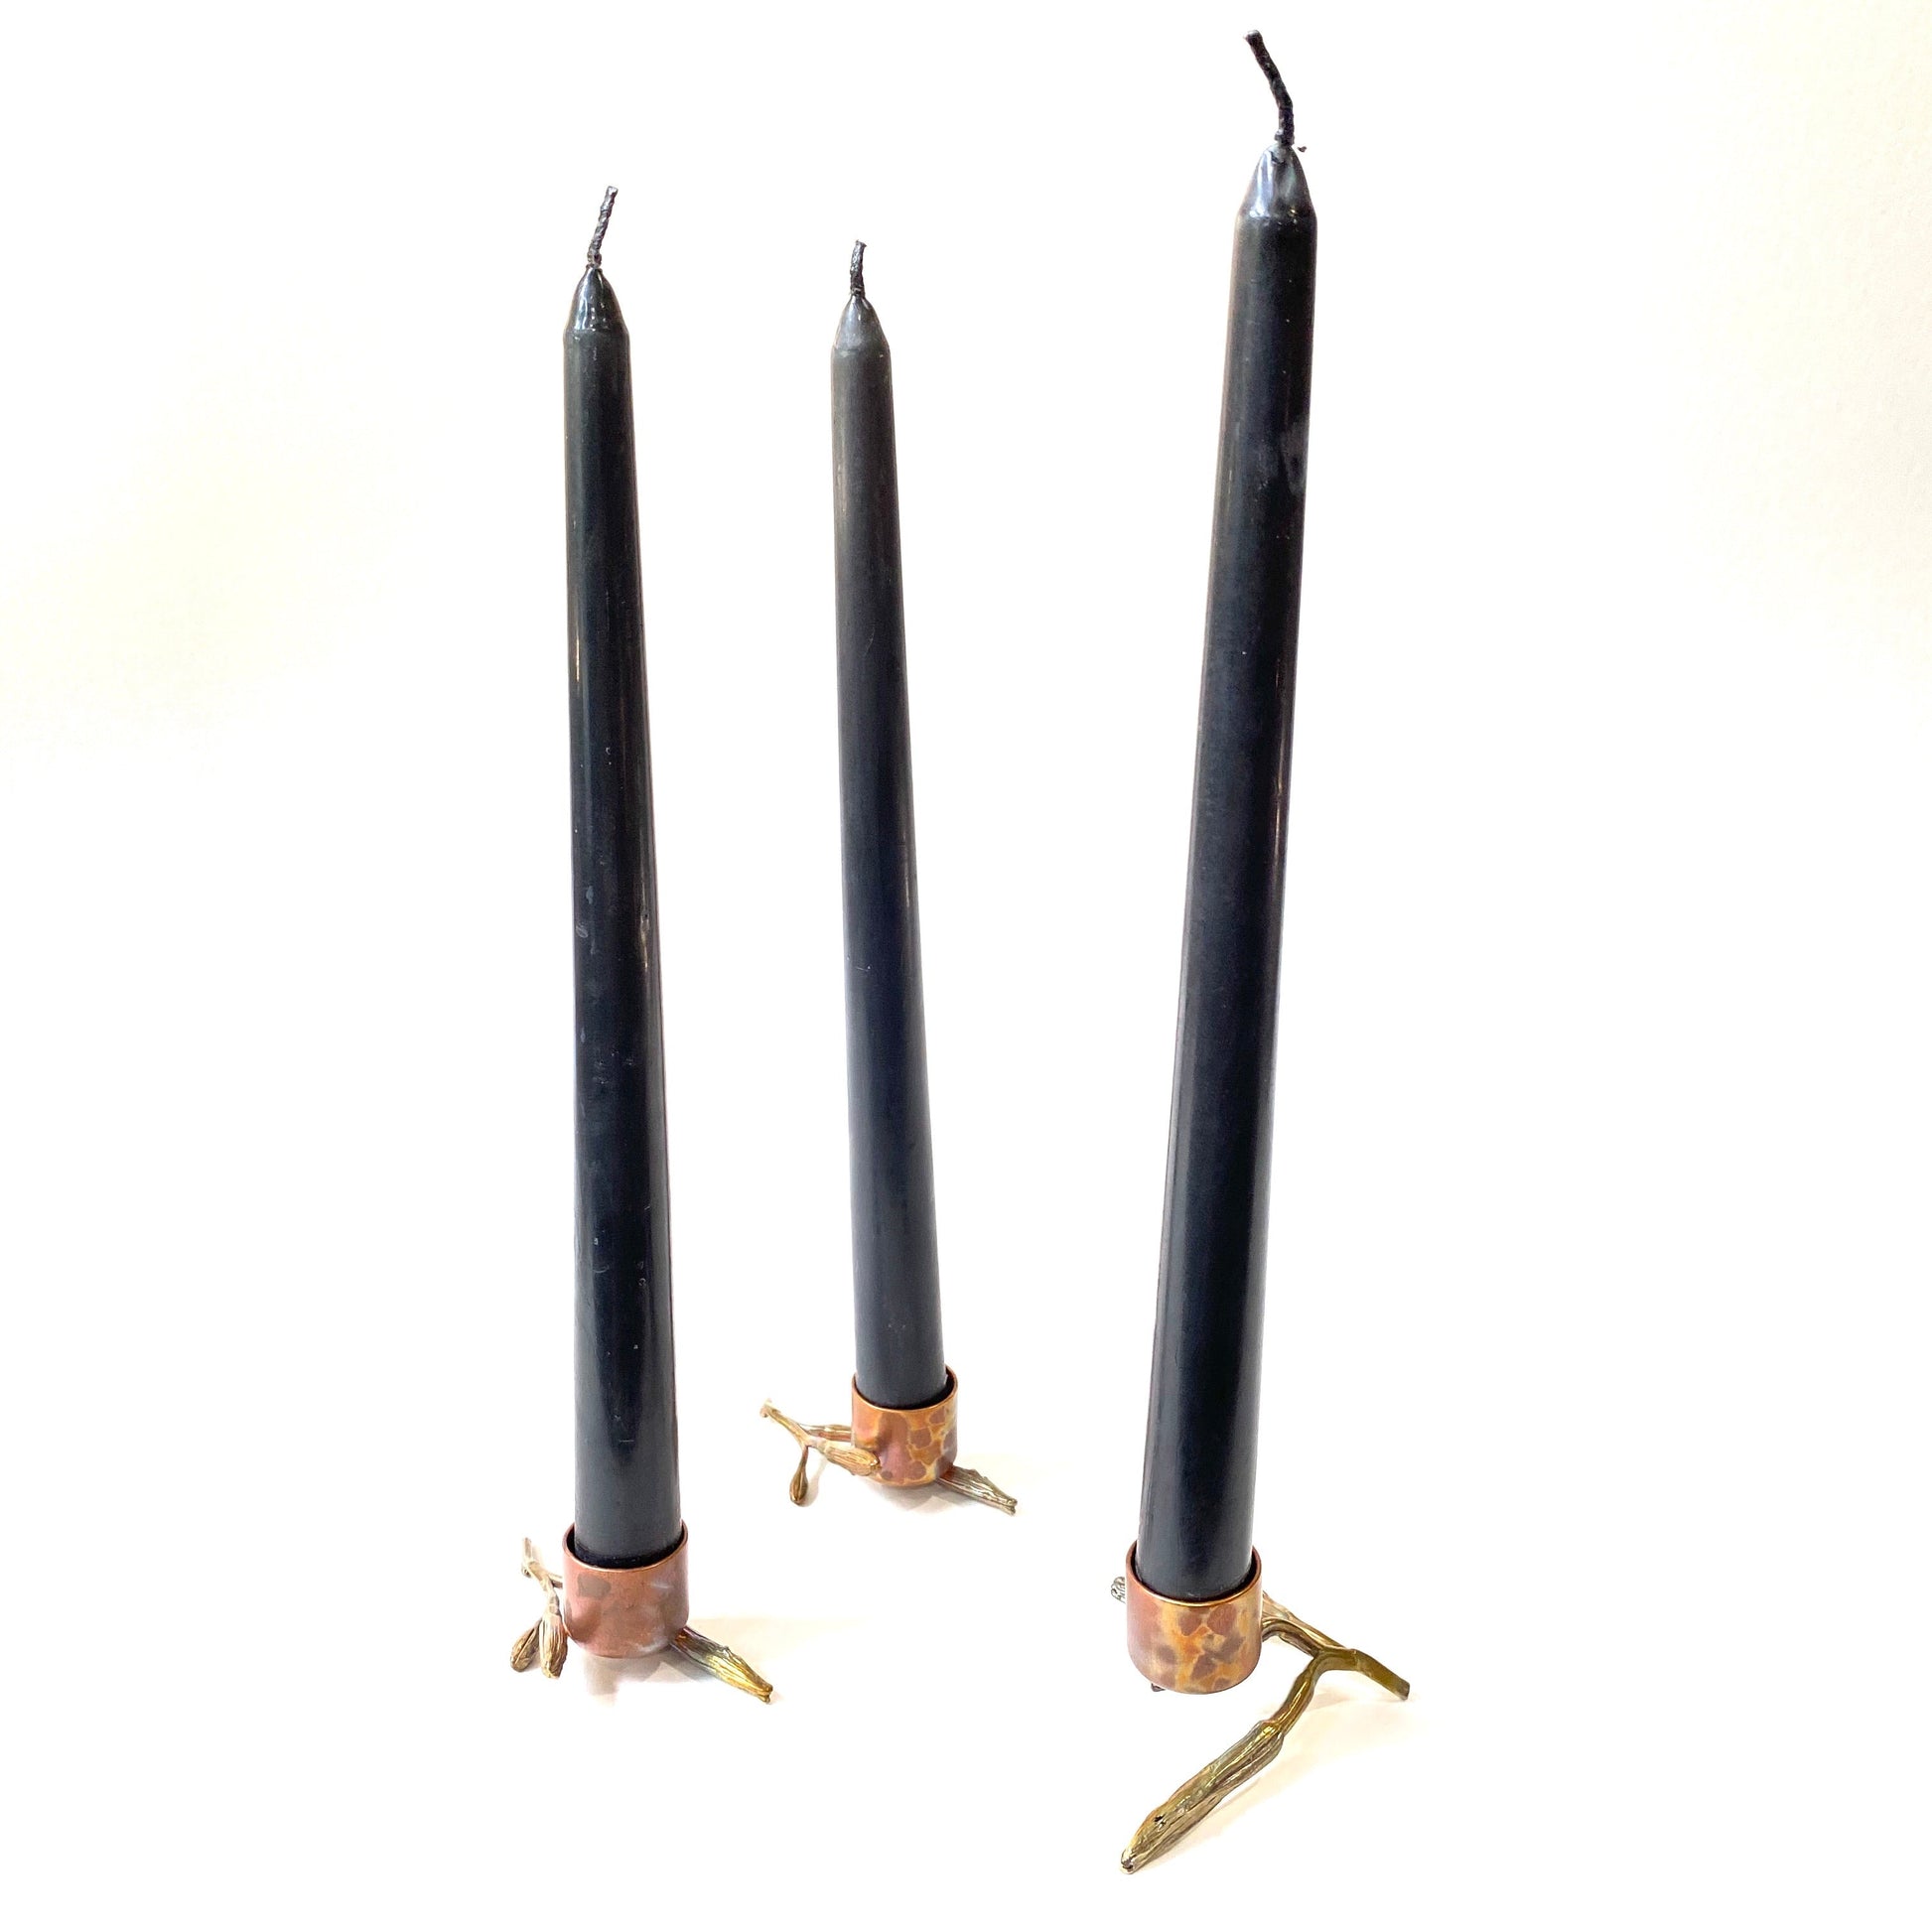 Full view of three Botanical Candlesticks with candles in them. The candlesticks are made from copper and brass and cast from water lily's.